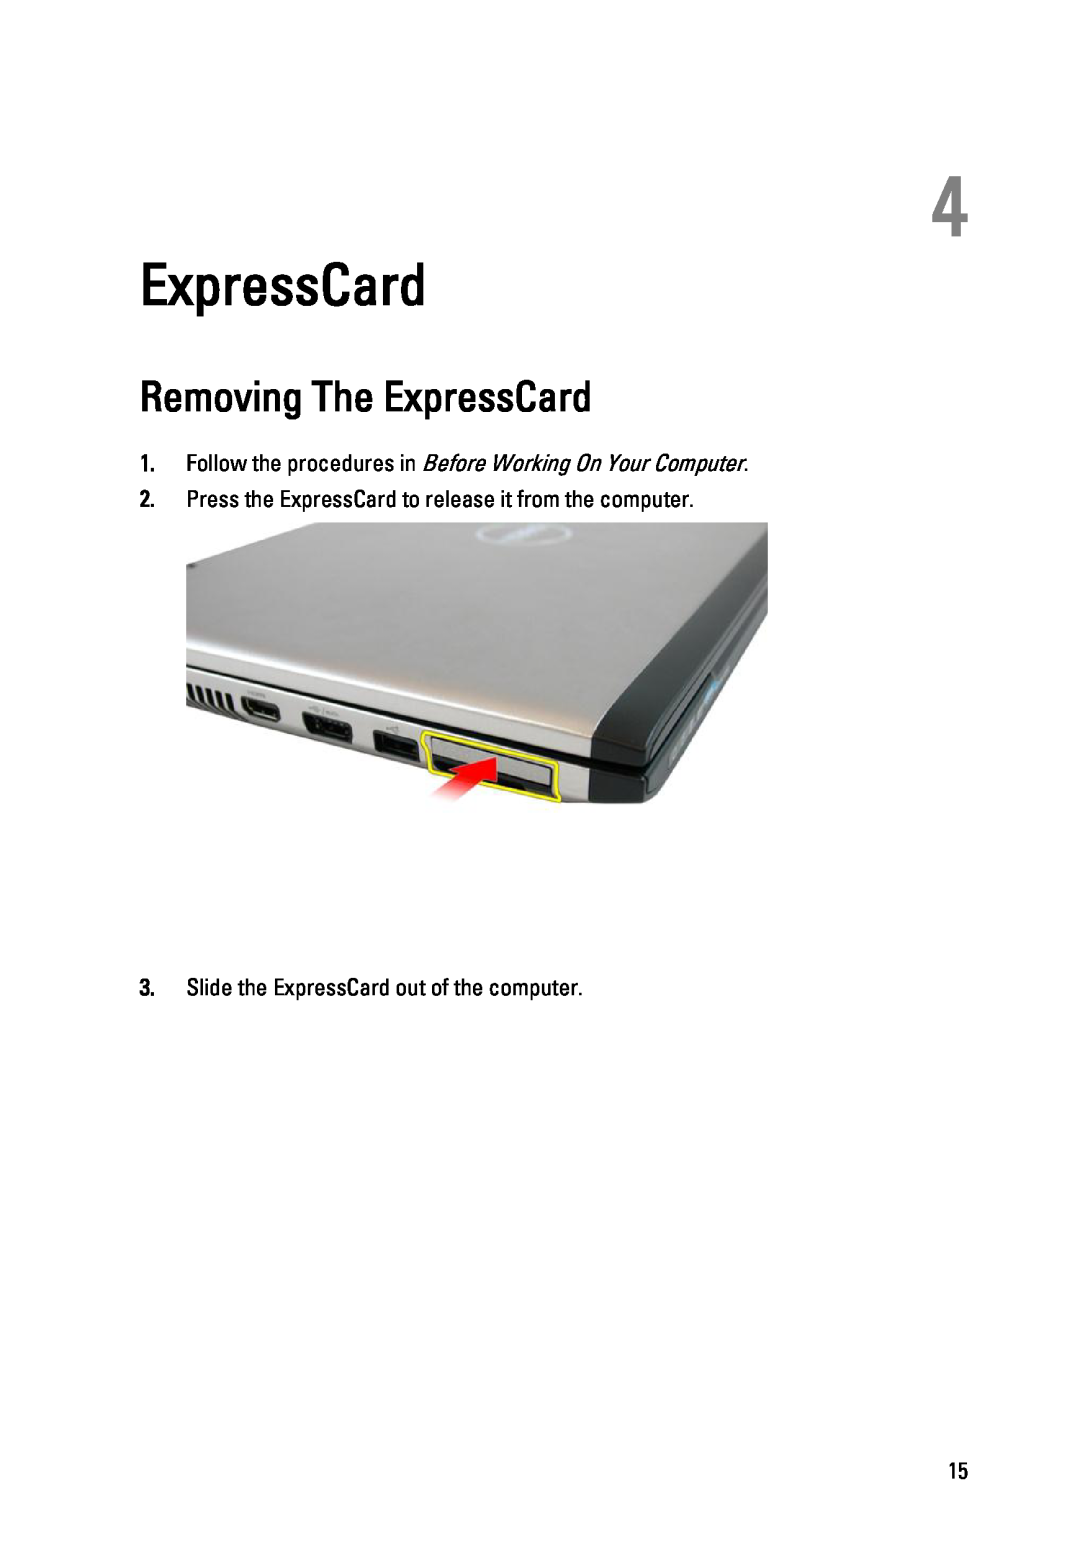 Dell 3450 owner manual Removing The ExpressCard, Press the ExpressCard to release it from the computer 